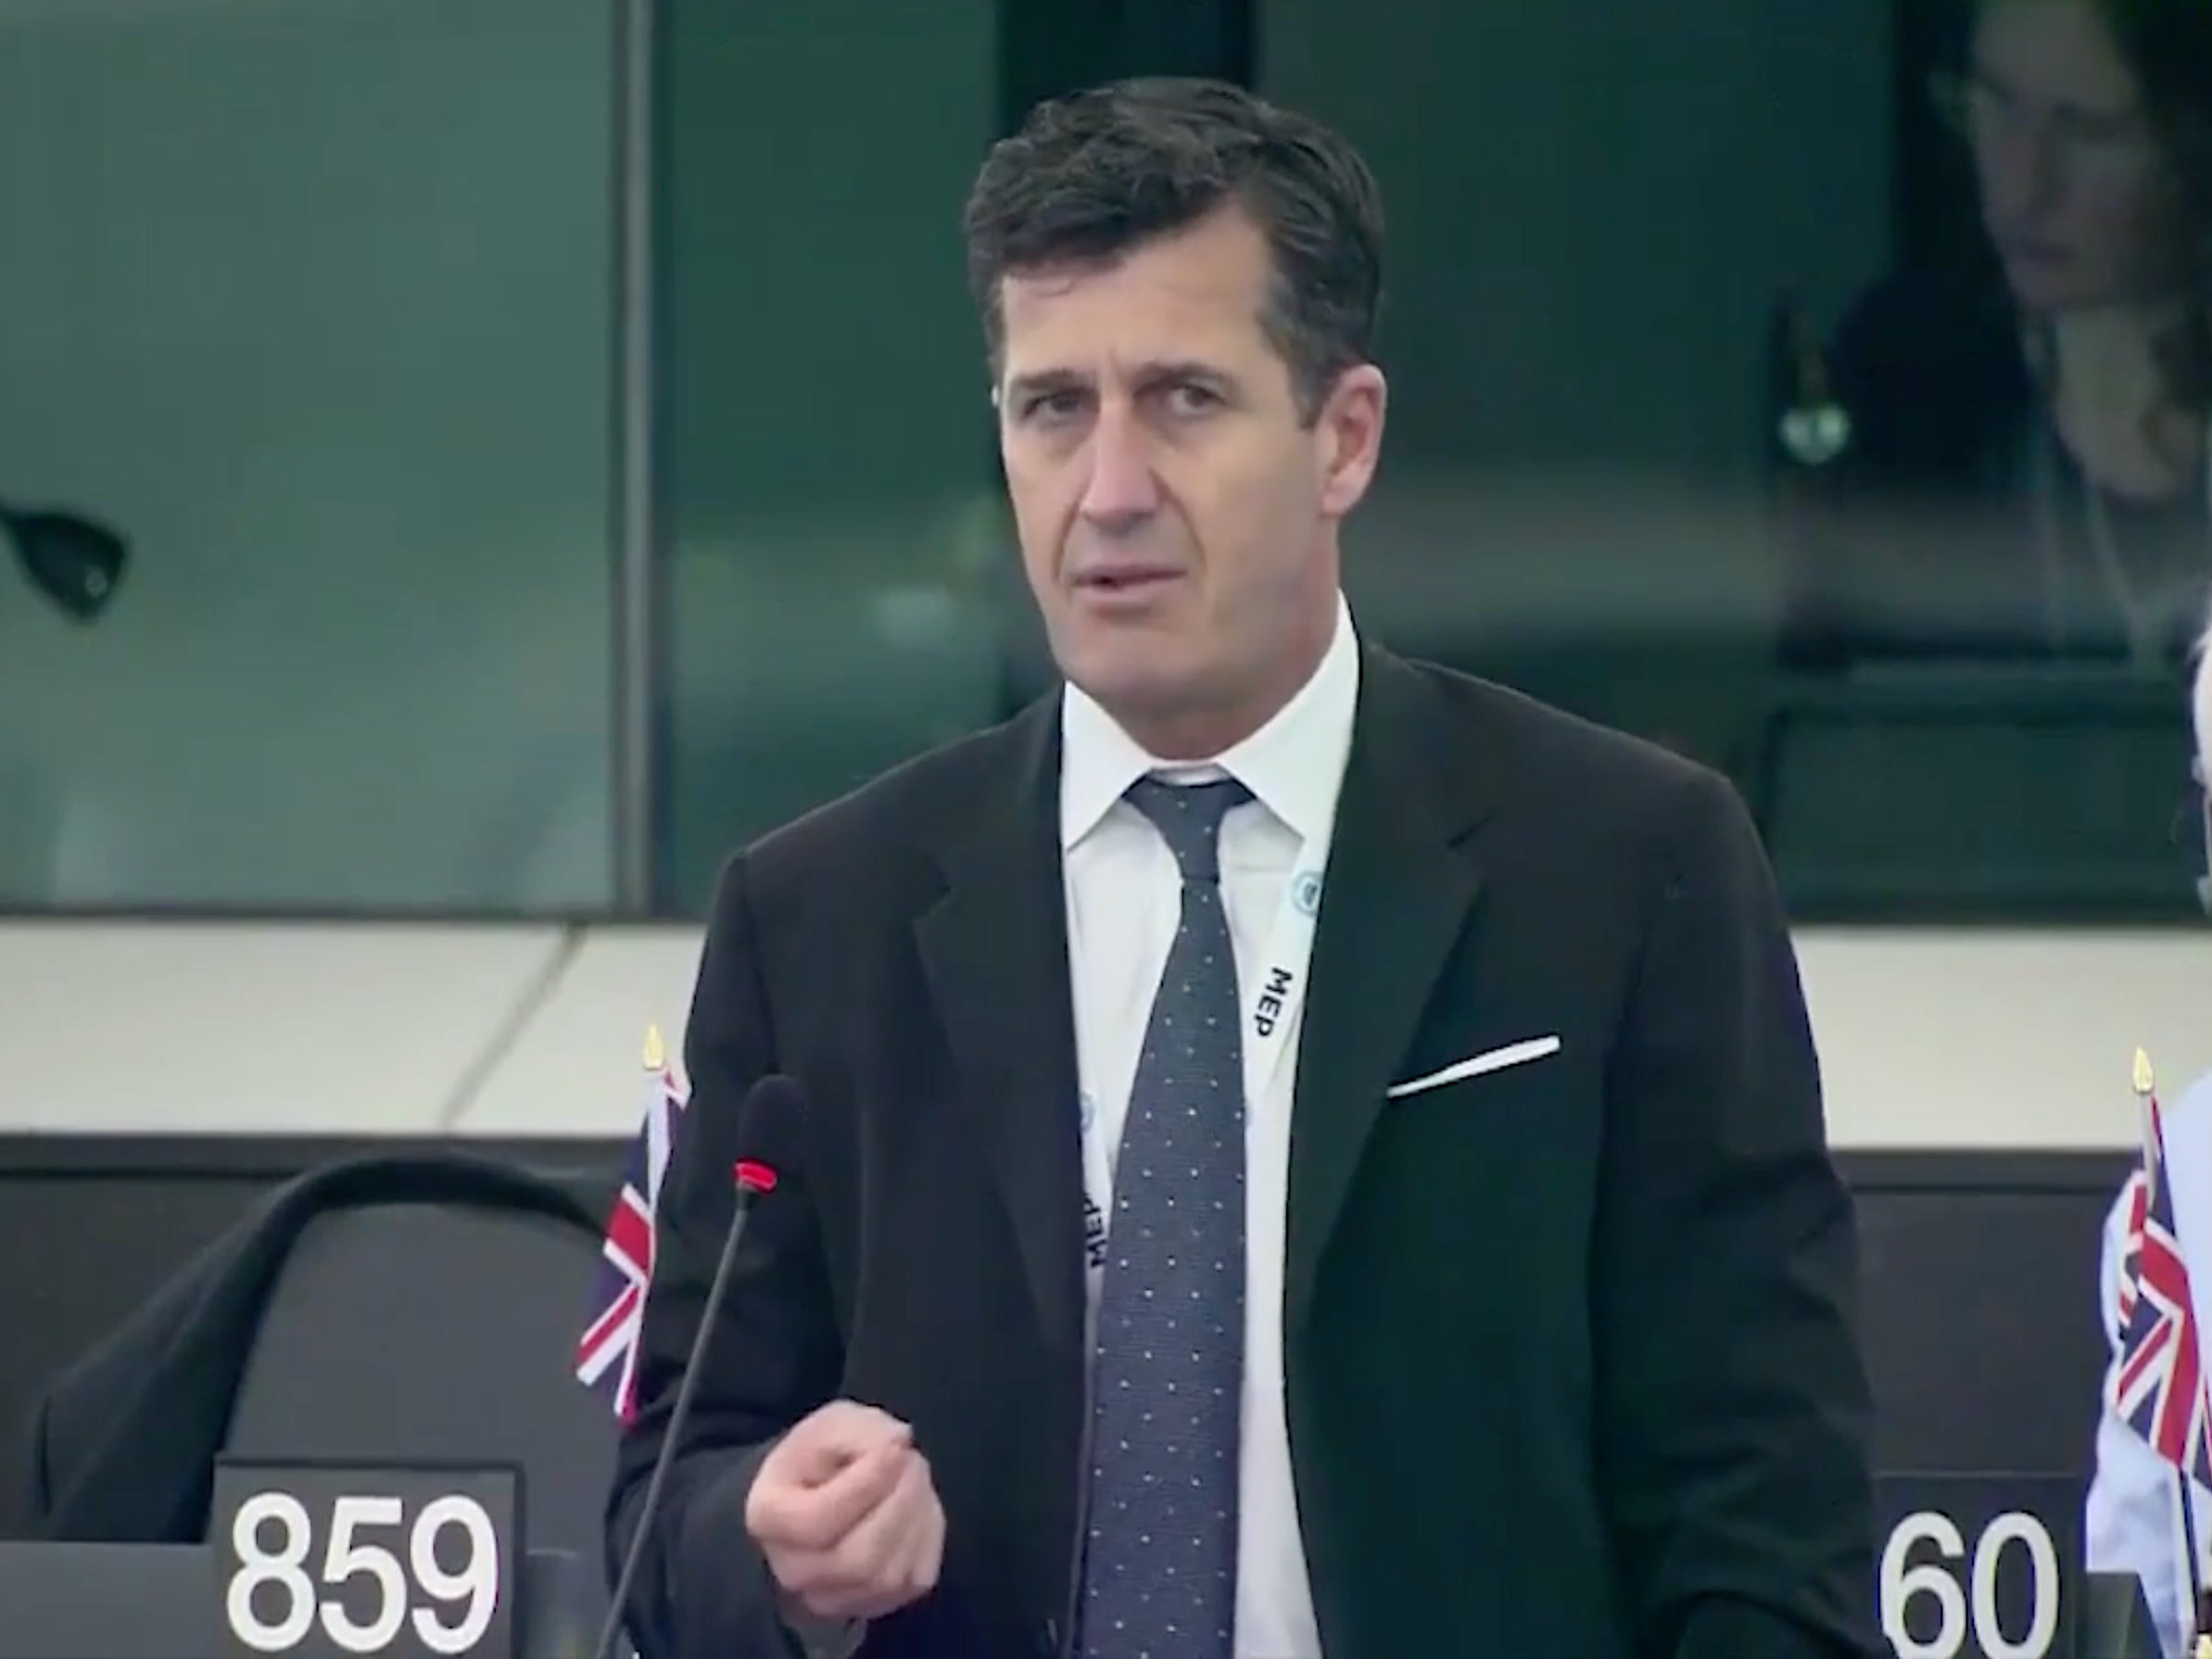 Robert Rowland, 54, represented the southeast of England at the European Parliament from July 2019 until December 2020